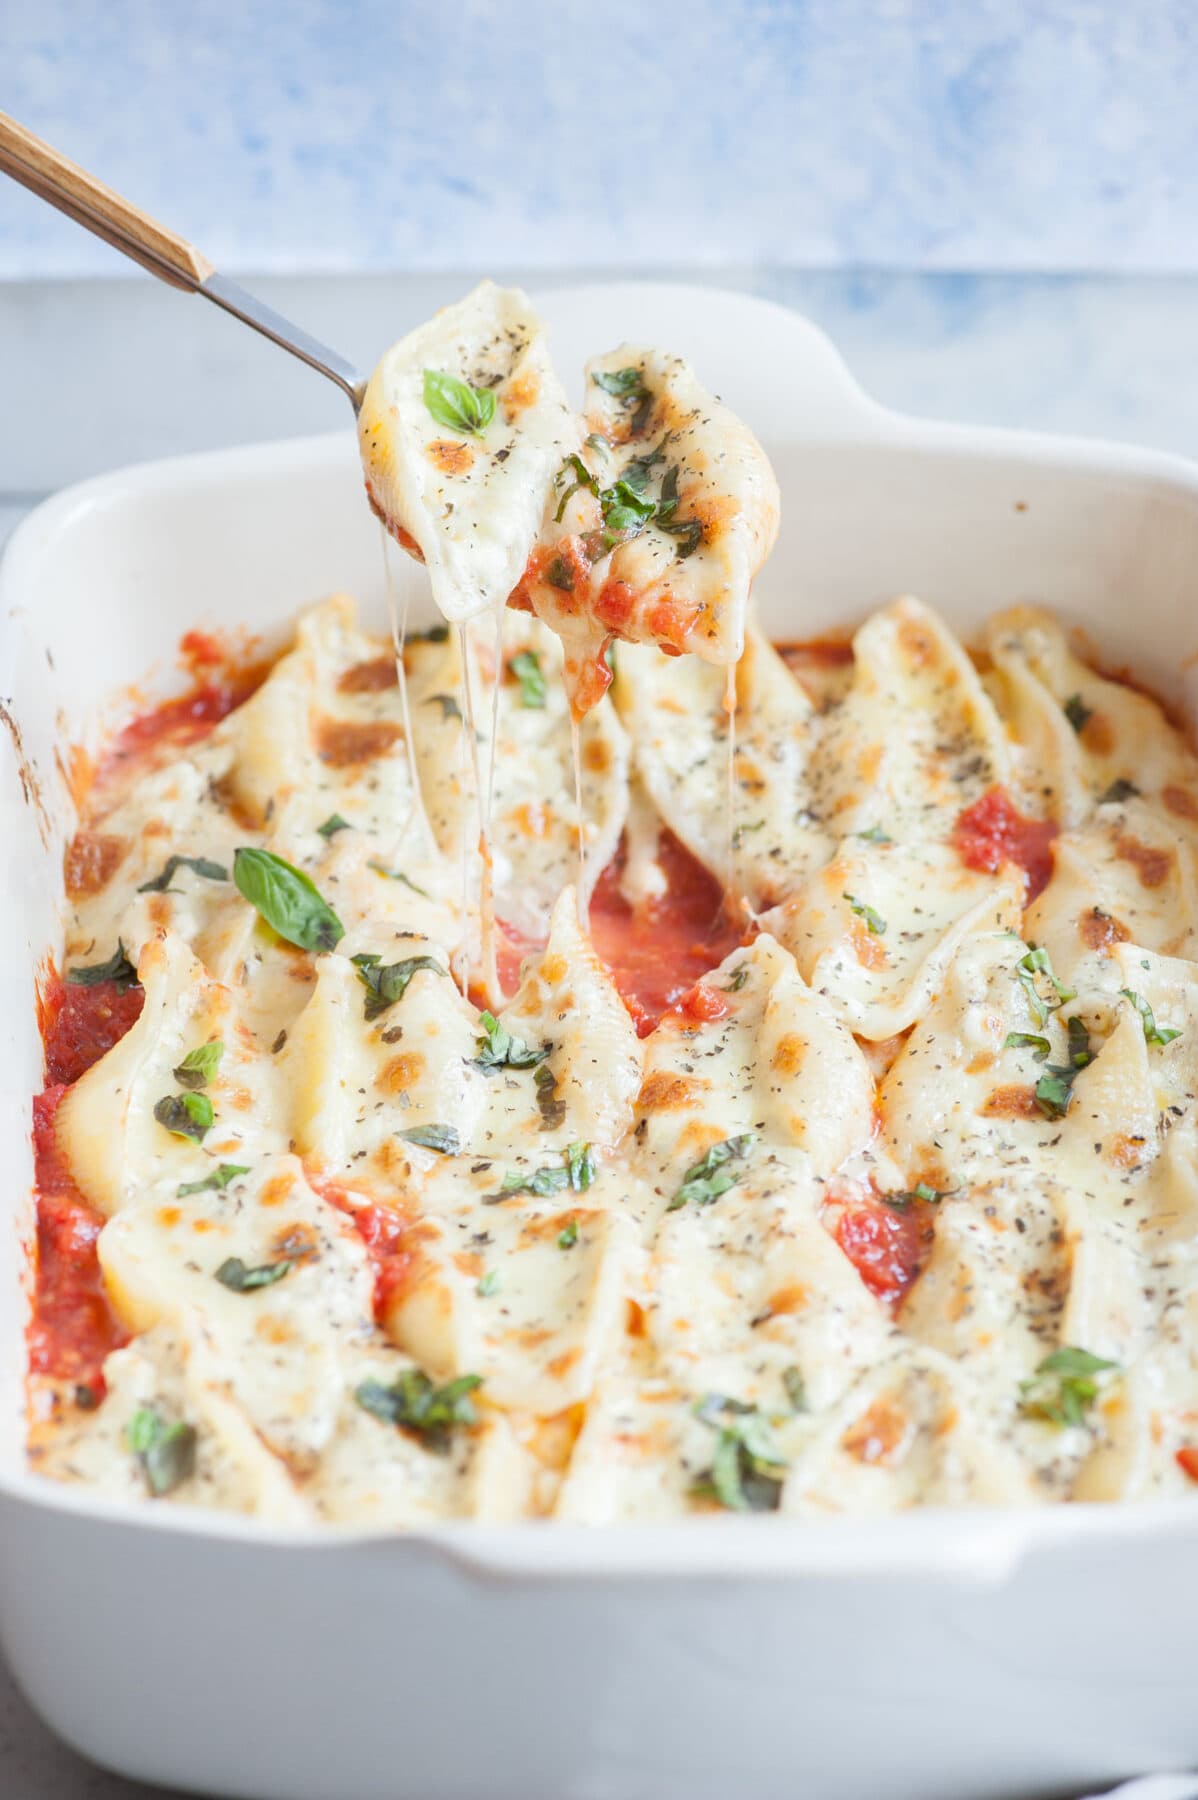 Cheese stuffed shells are being taken out of the dish with a spoon. Close up picture of stuffed shells.